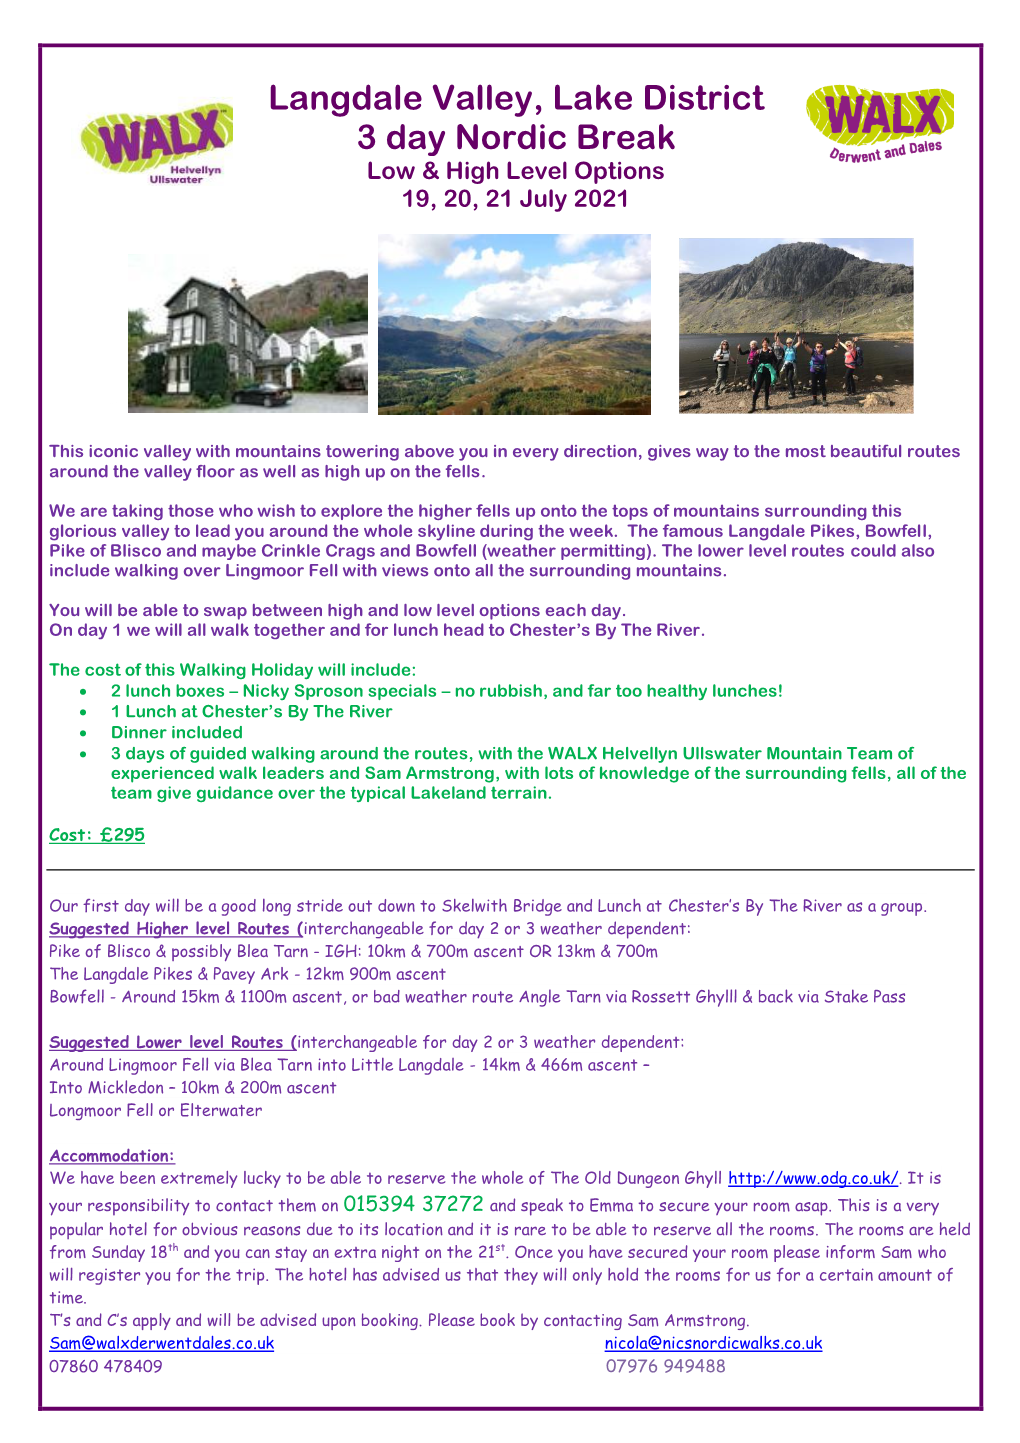 Langdale Valley, Lake District 3 Day Nordic Break Low & High Level Options 19, 20, 21 July 2021